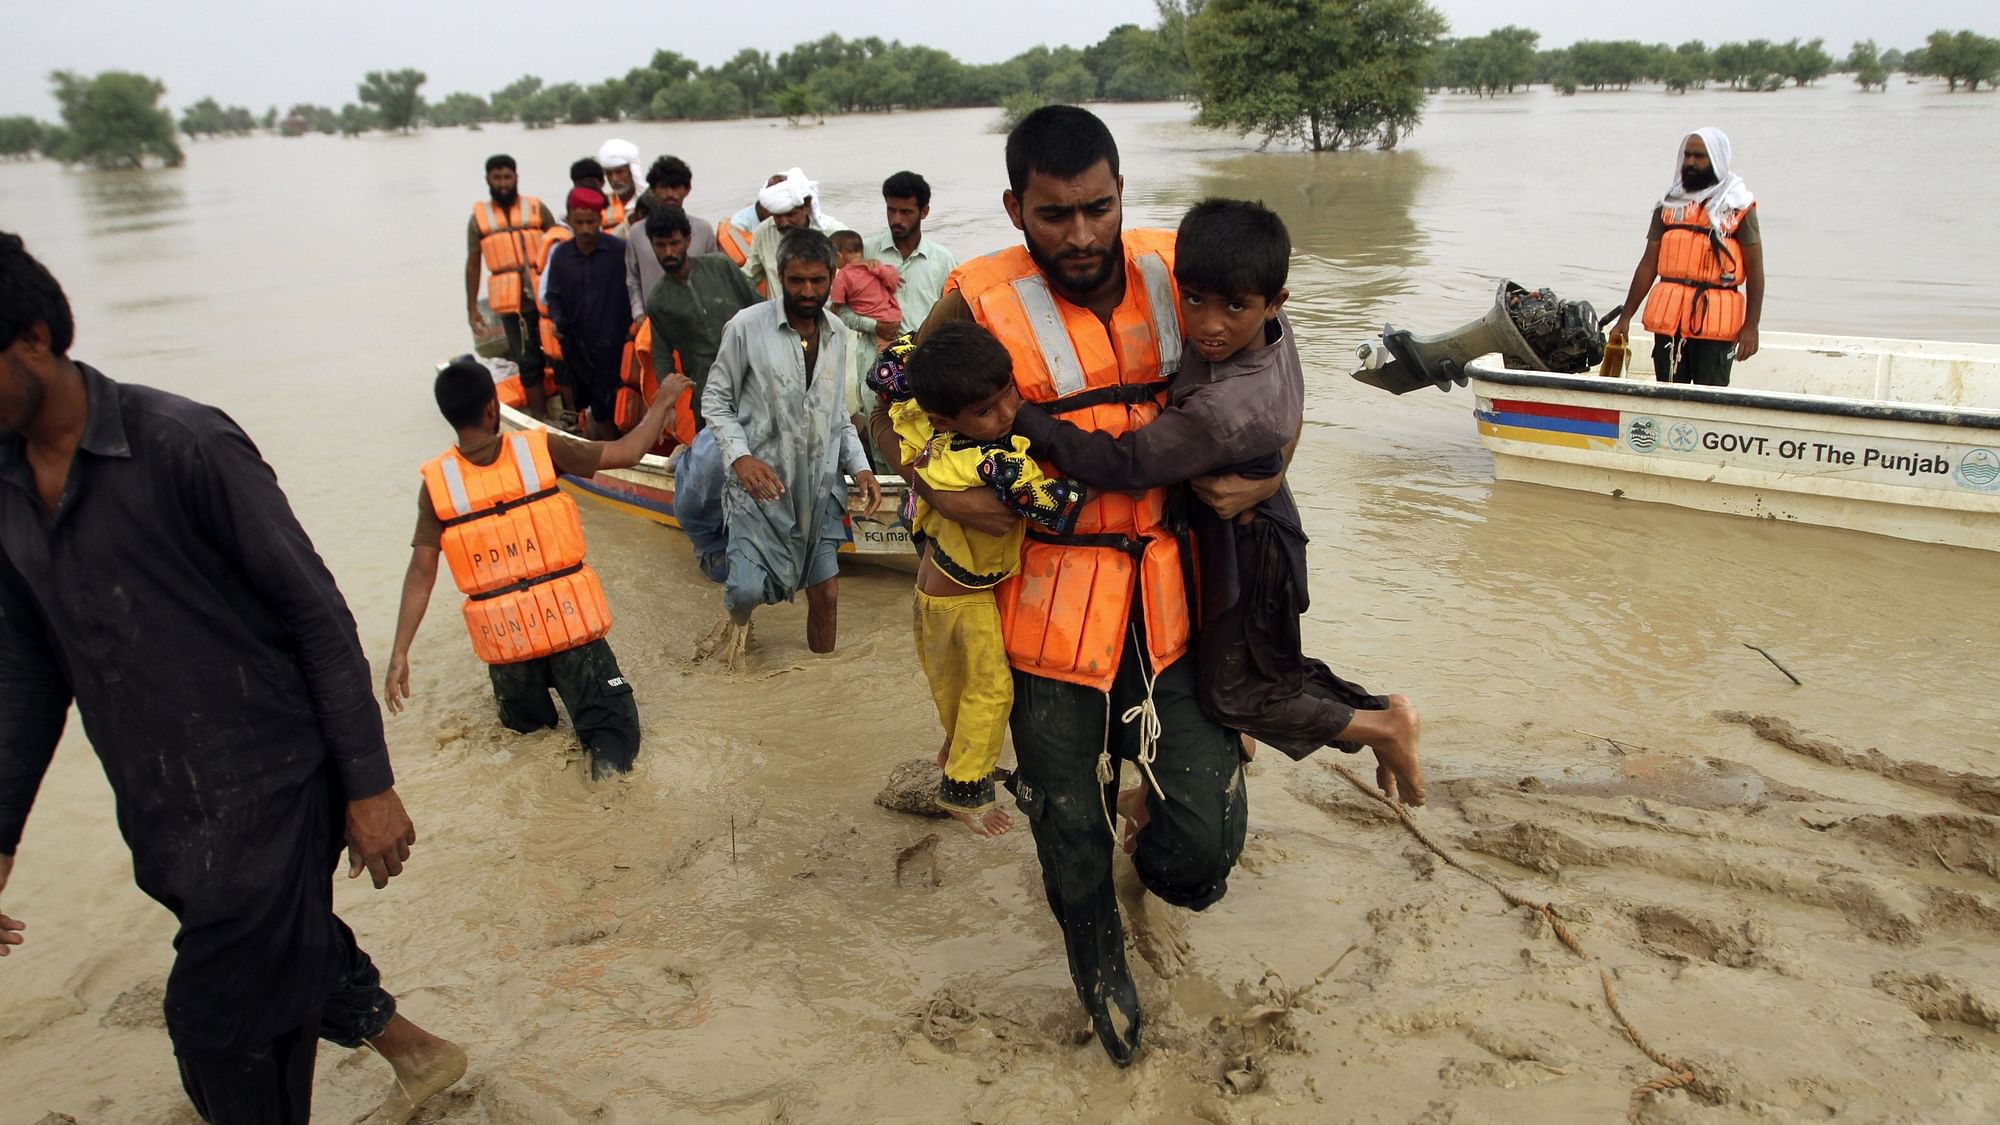 <div class="paragraphs"><p>Devastating <a href="https://www.thequint.com/topic/pakistan-floods">floods</a> in <a href="https://www.thequint.com/topic/pakistan">Pakistan</a> have killed over a thousand people and wreaked damage to property and natural life. </p></div>